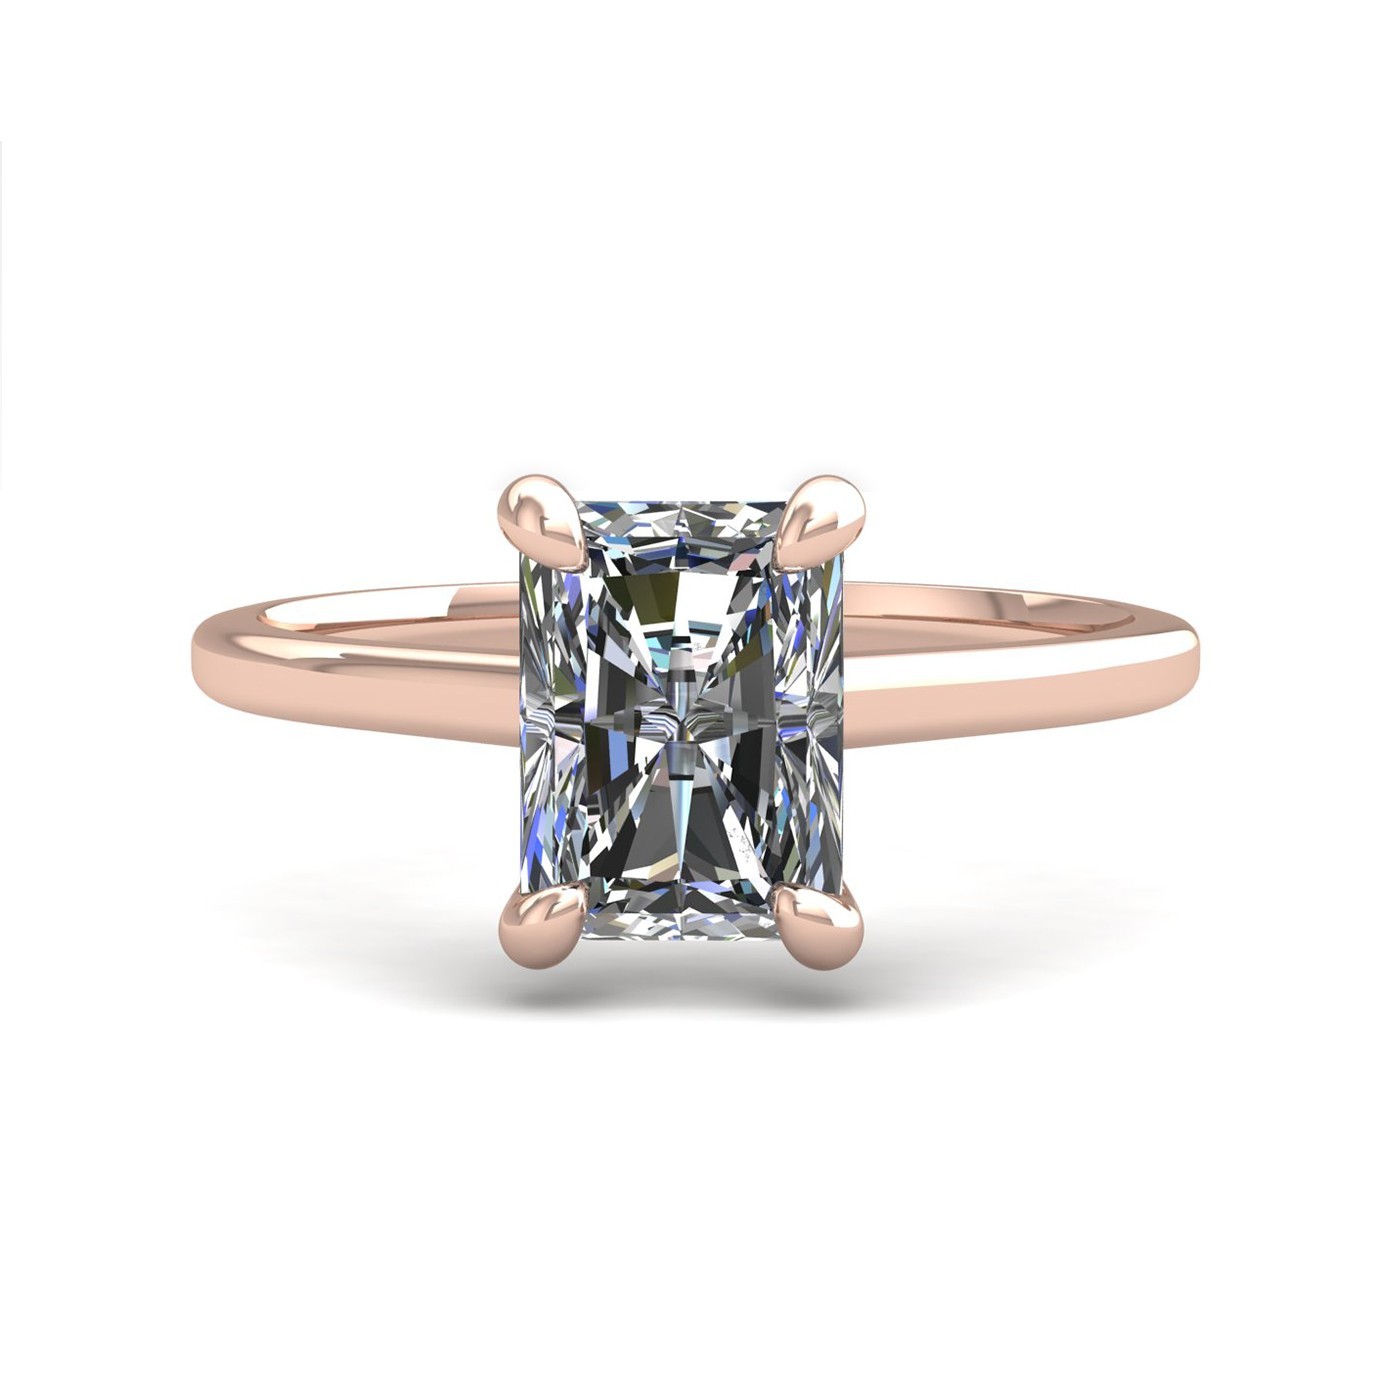 18k rose gold  1,20 ct 4 prongs solitaire radiant cut diamond engagement ring with whisper thin band Photos & images